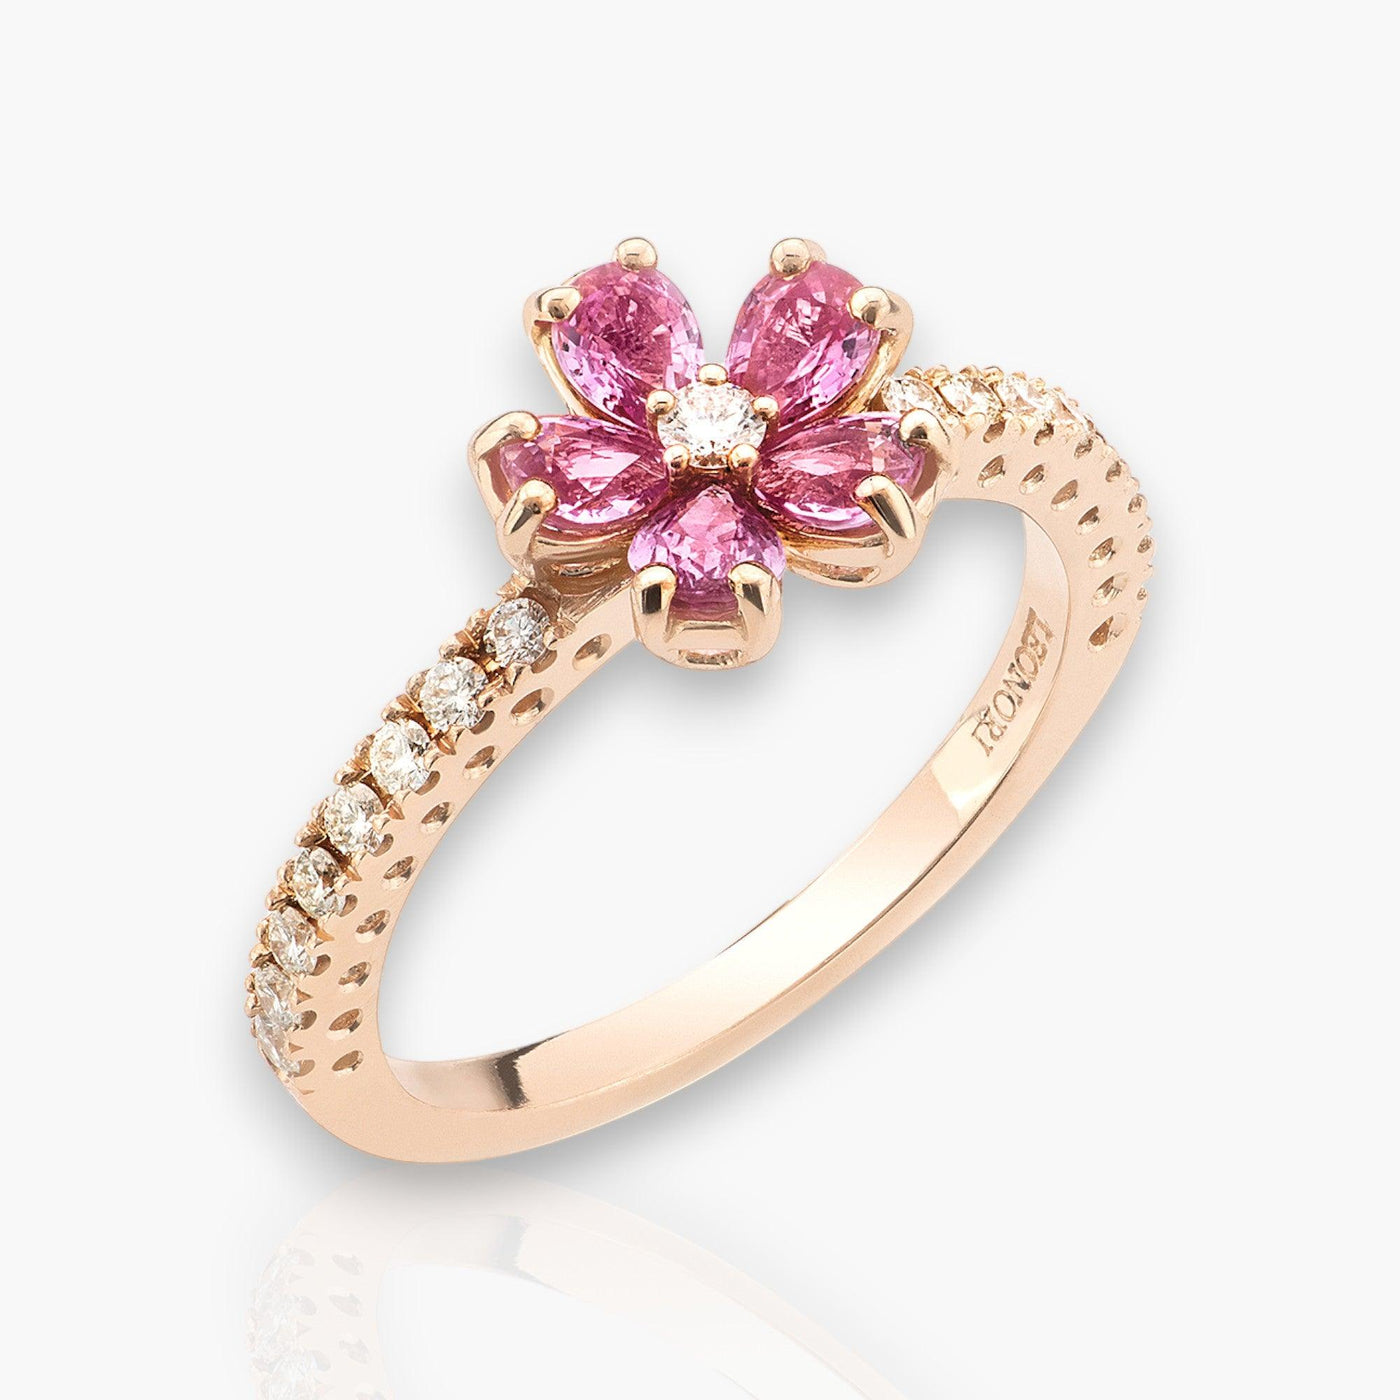 Ring "Cherry Blossom", Rose Gold, Pink Sapphire and Diamonds